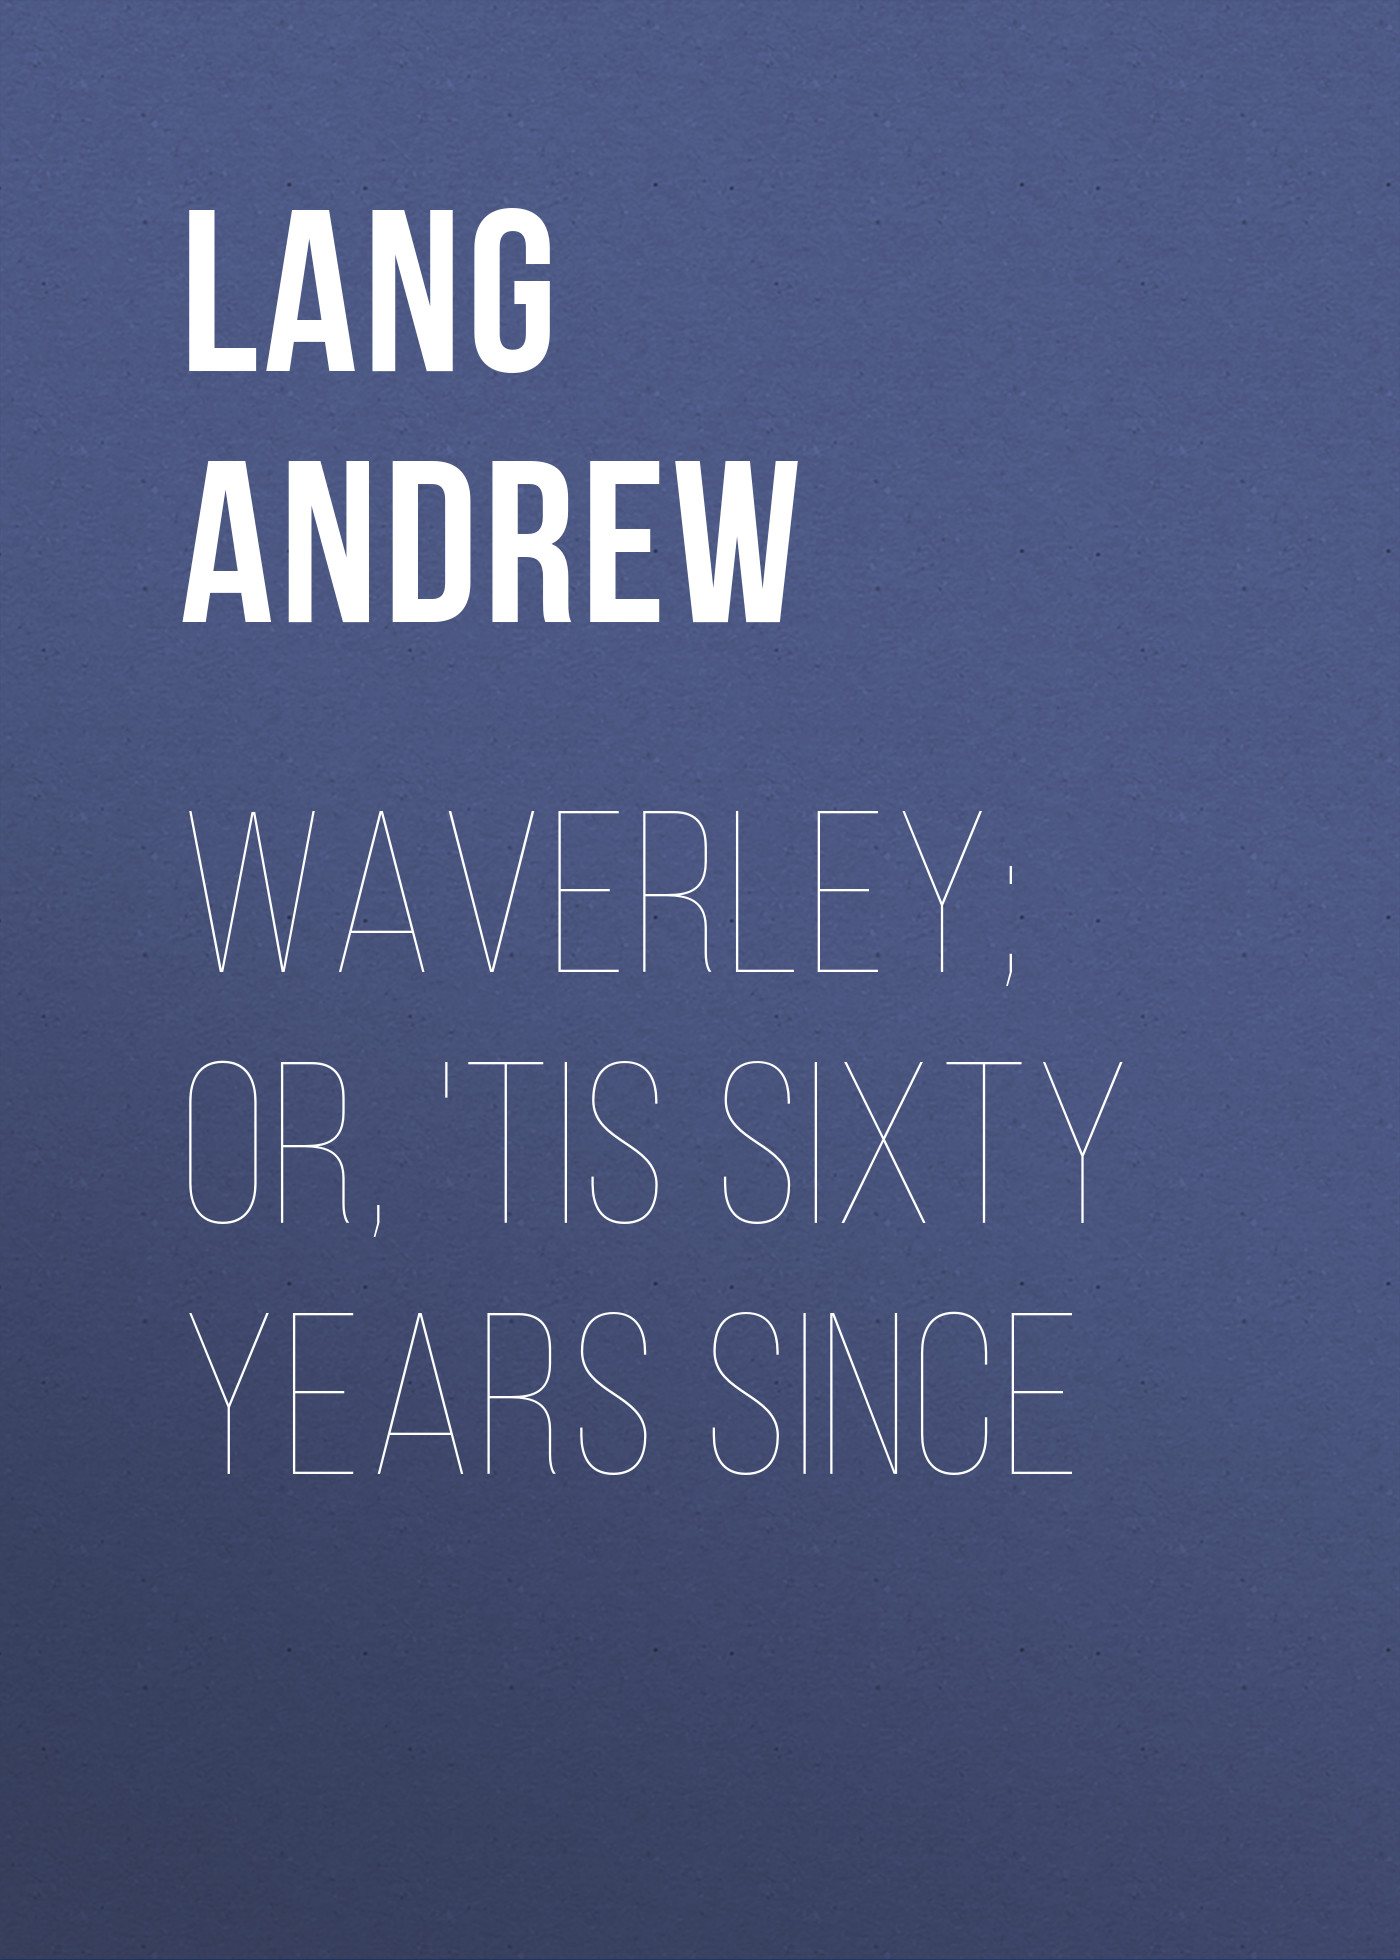 Waverley; Or, \'Tis Sixty Years Since